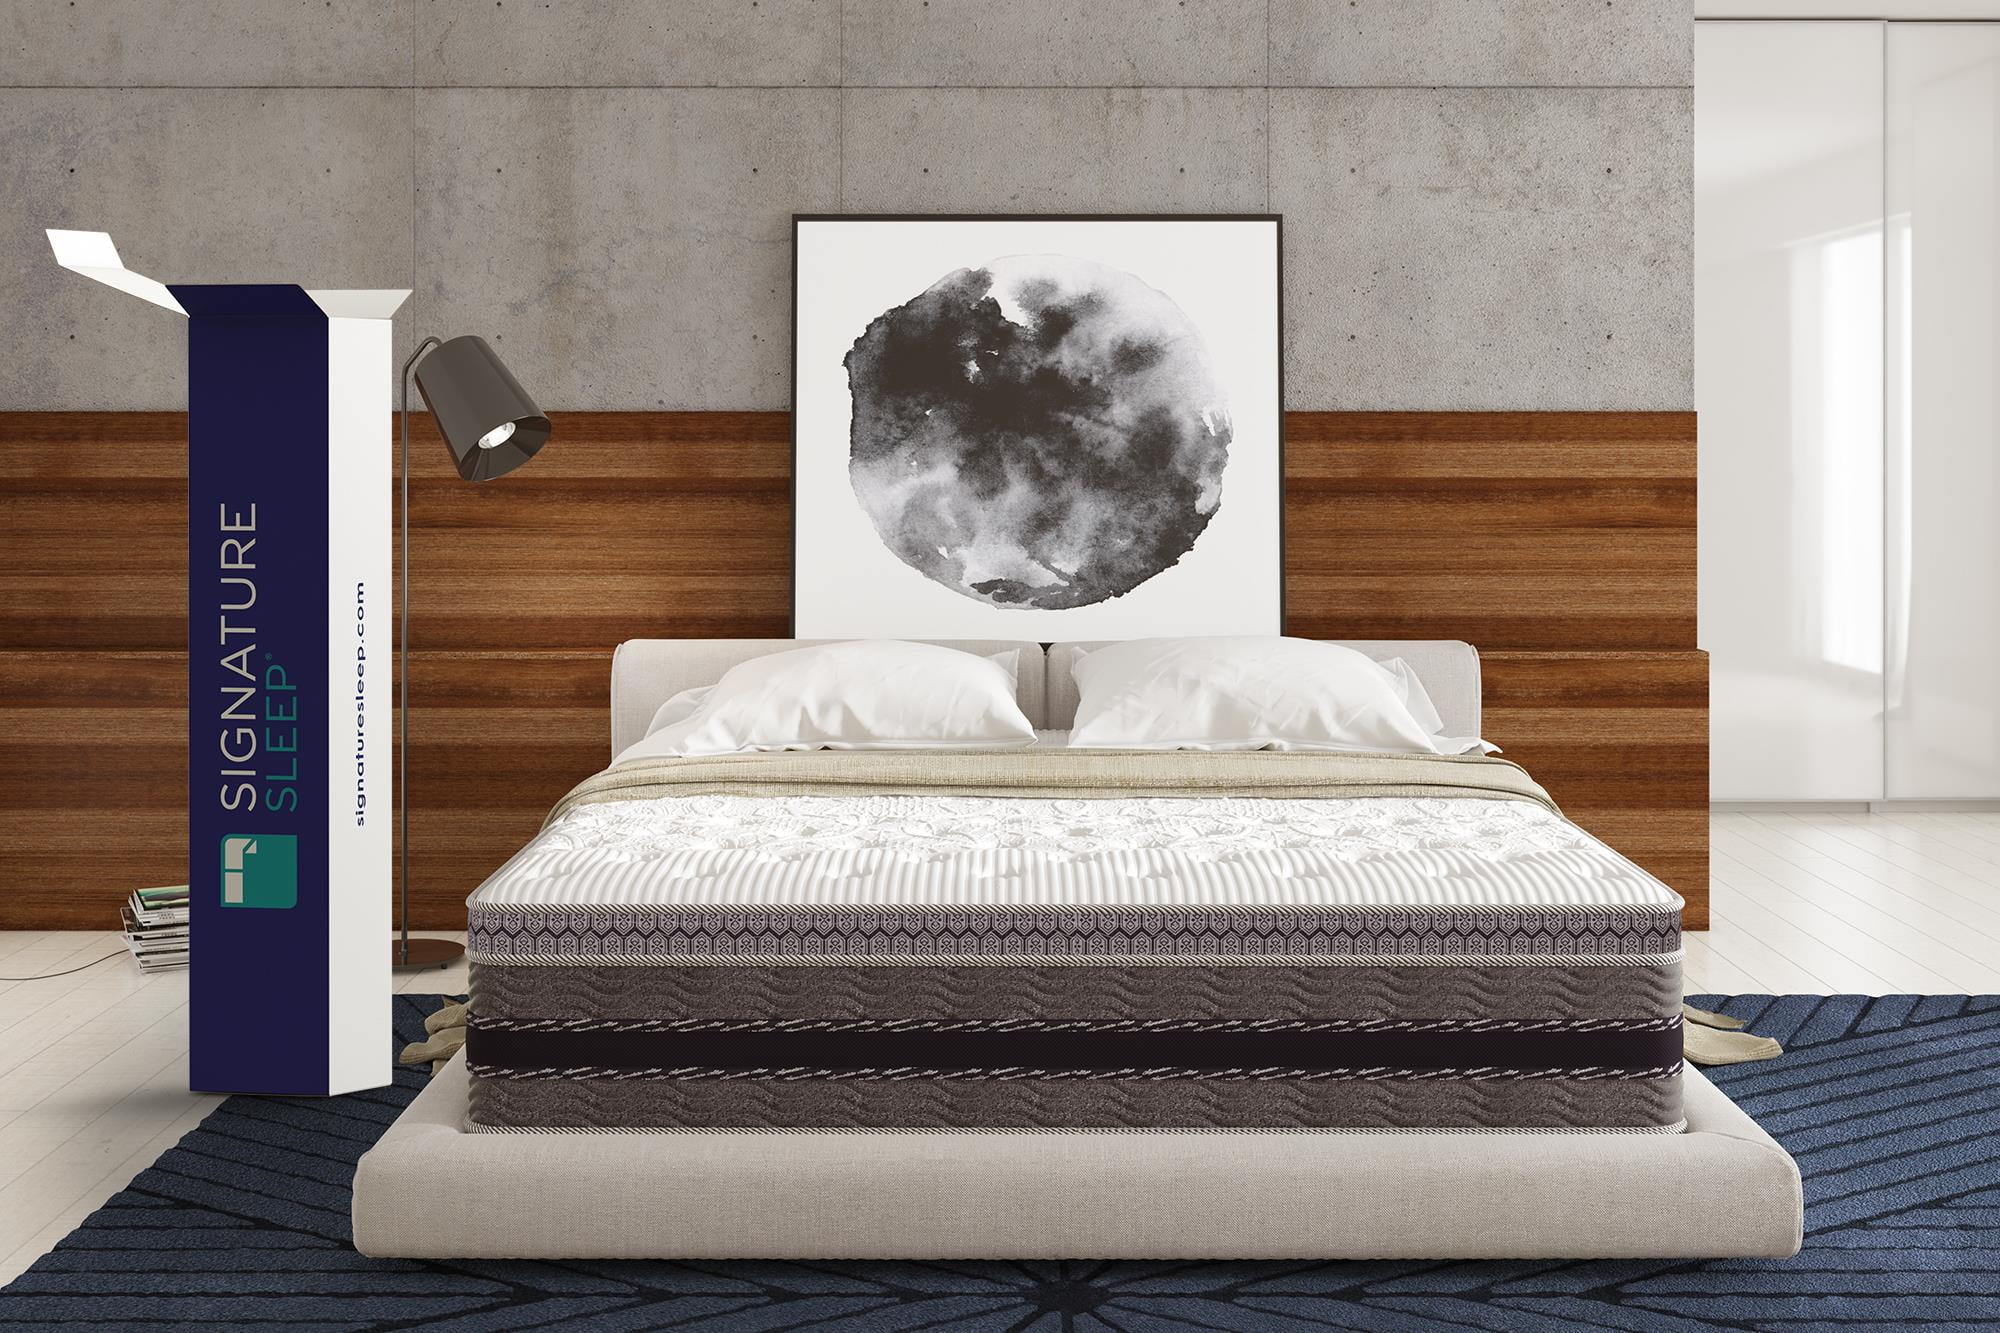 The Luxury of Good Sleep with a Holder Mattress - Indiana Design